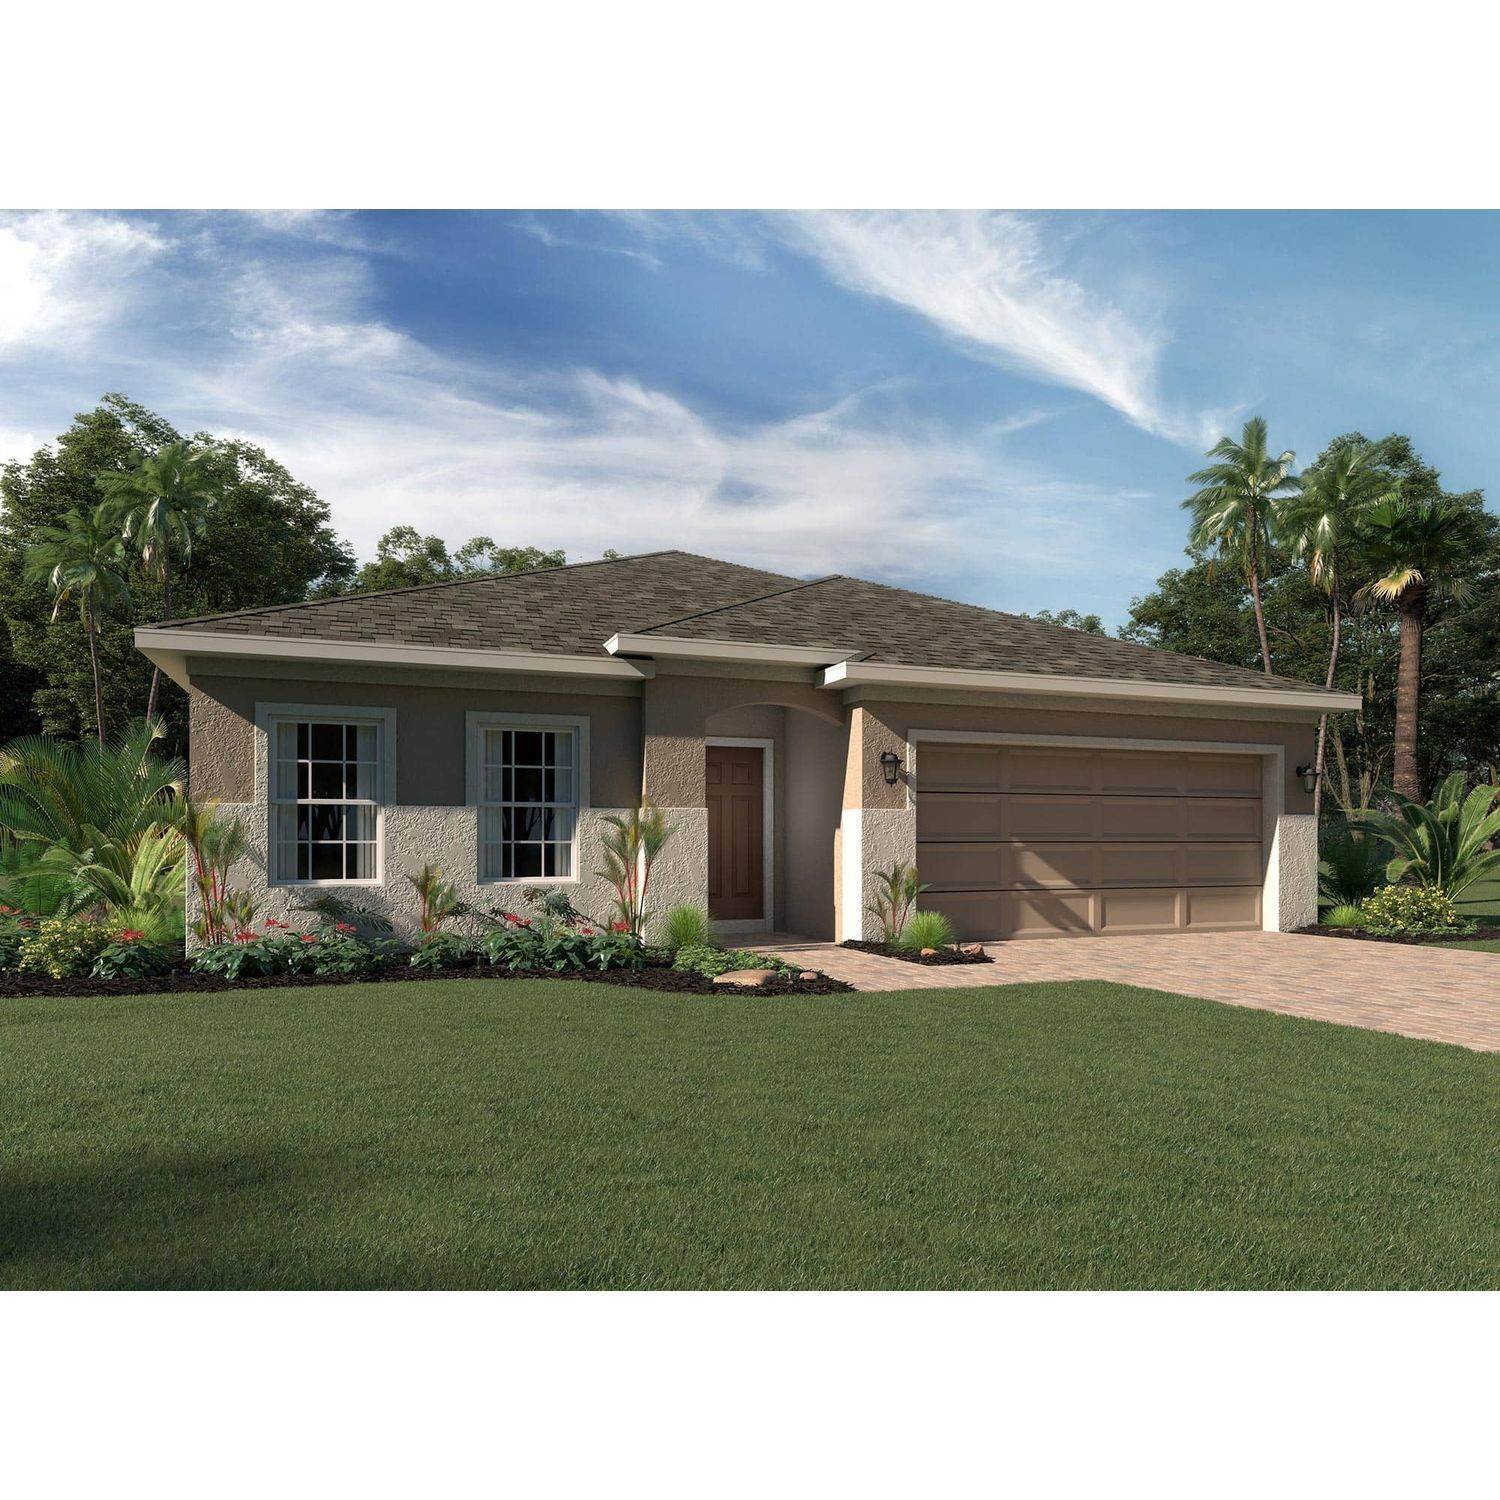 Single Family for Sale at Minneola, FL 34715